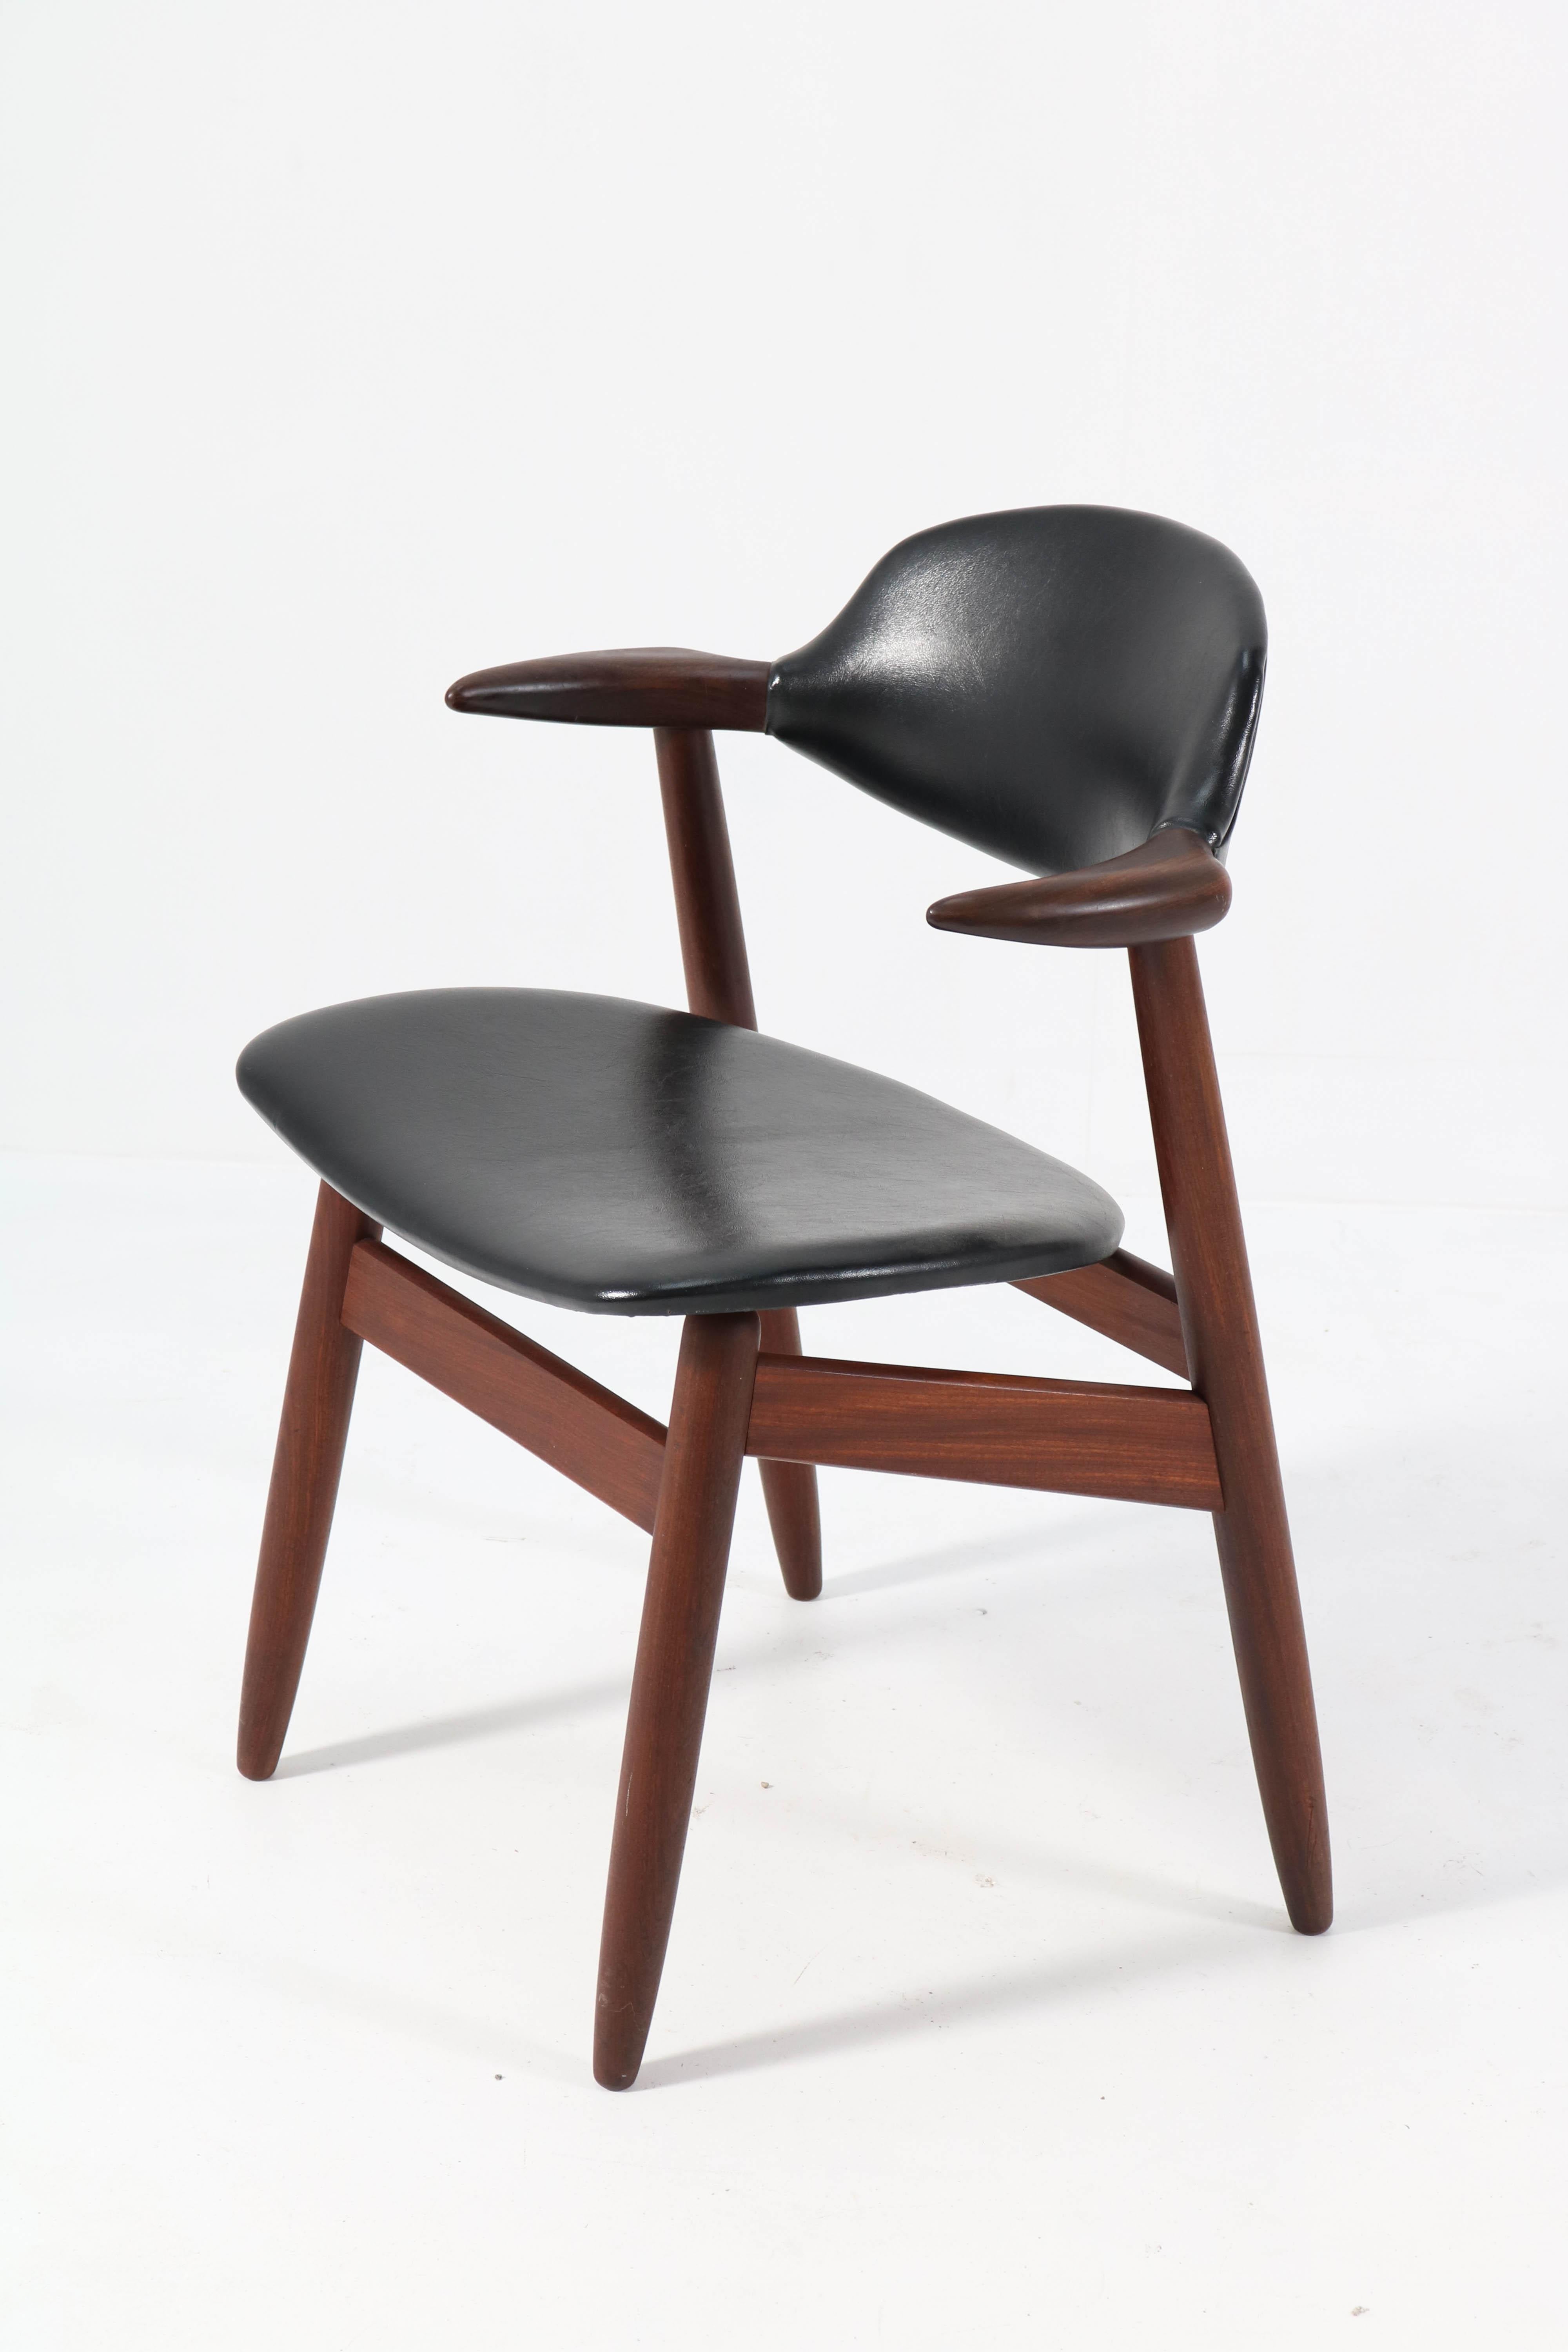 Two Mid-Century Modern Teak Cowhorn Chairs by Tijsseling for Hulmefa, 1960s For Sale 2